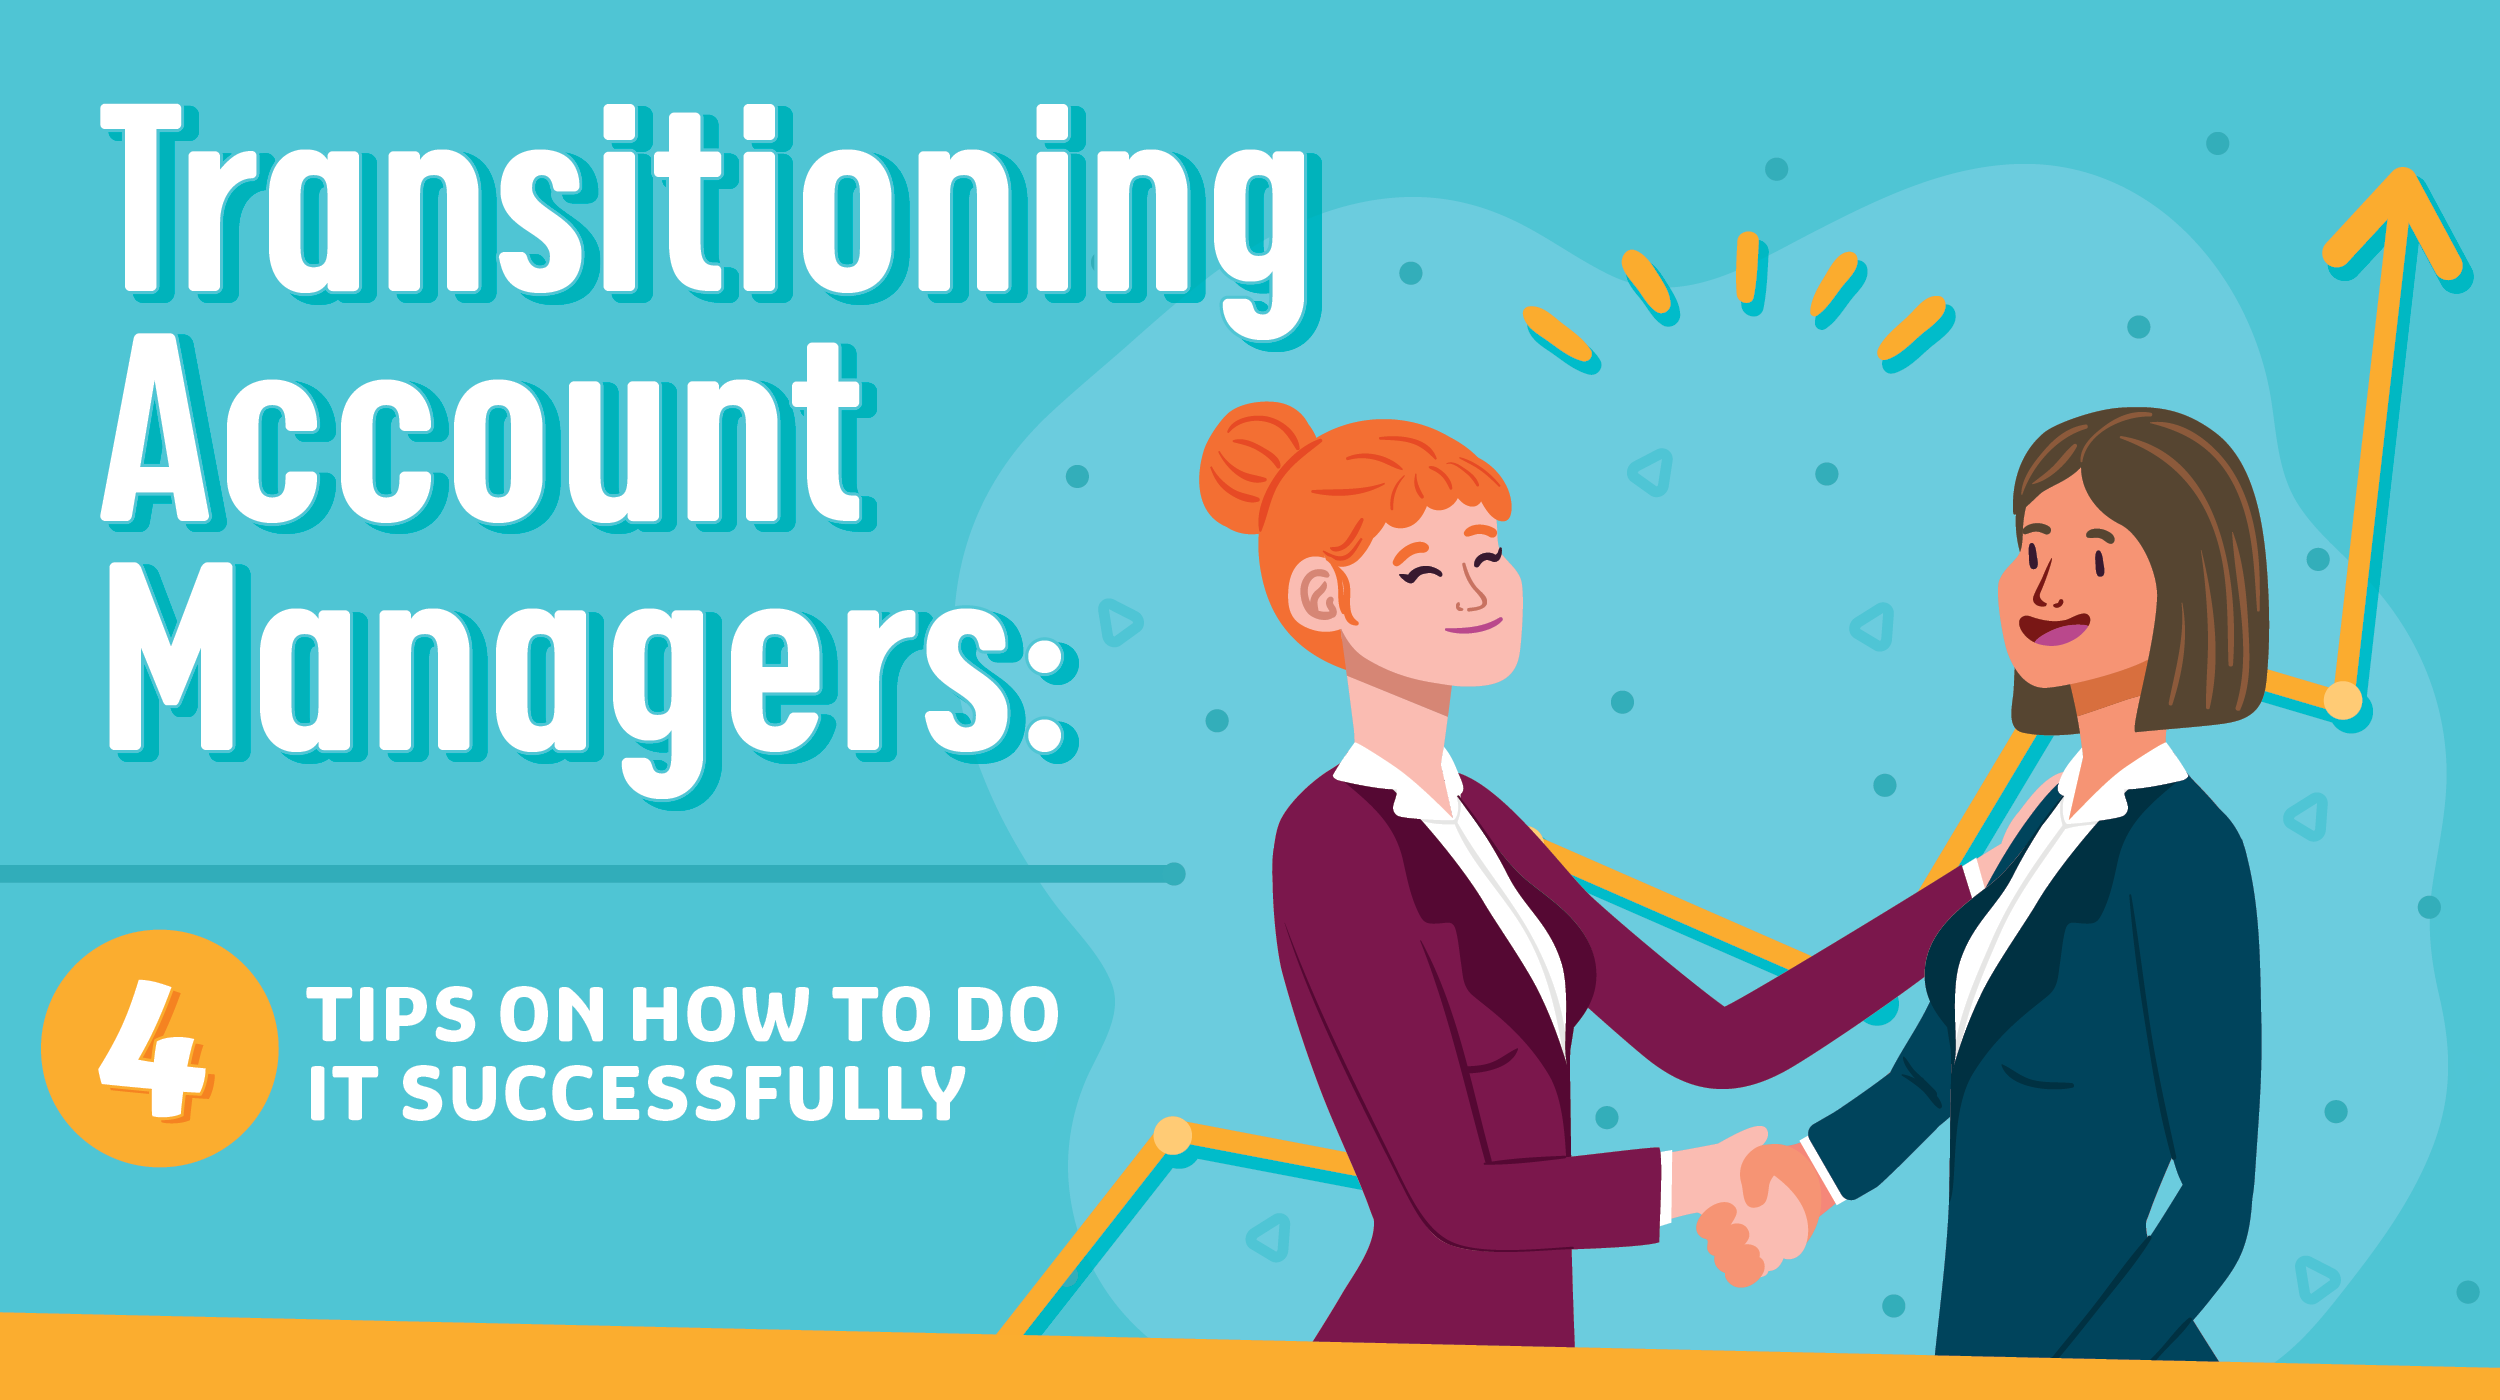 Transitioning Account Managers